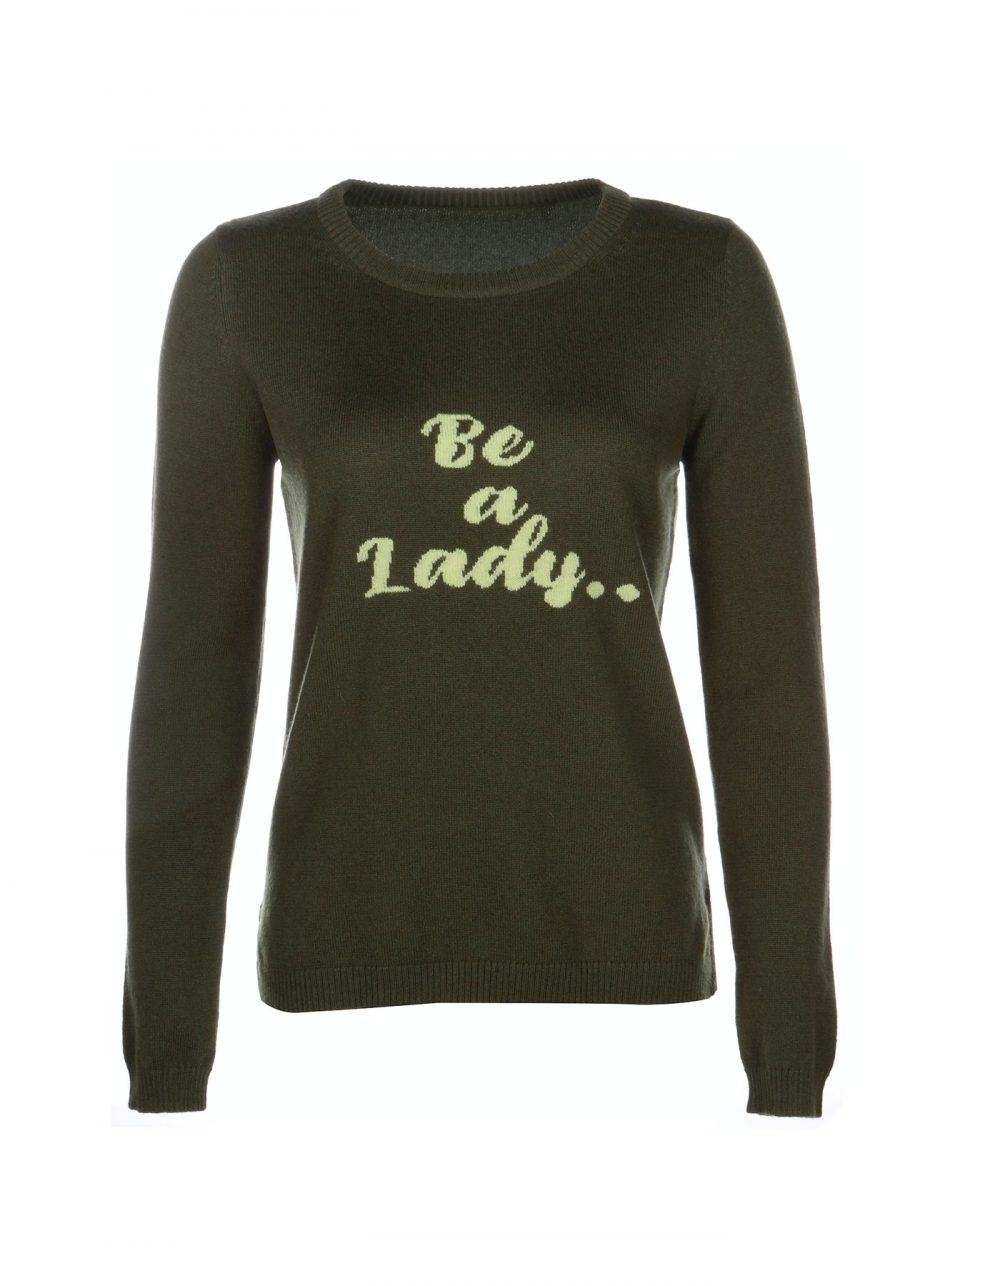 Be a Lady Scout cashmere jumpers, the designer cashmere range at malin darlin.